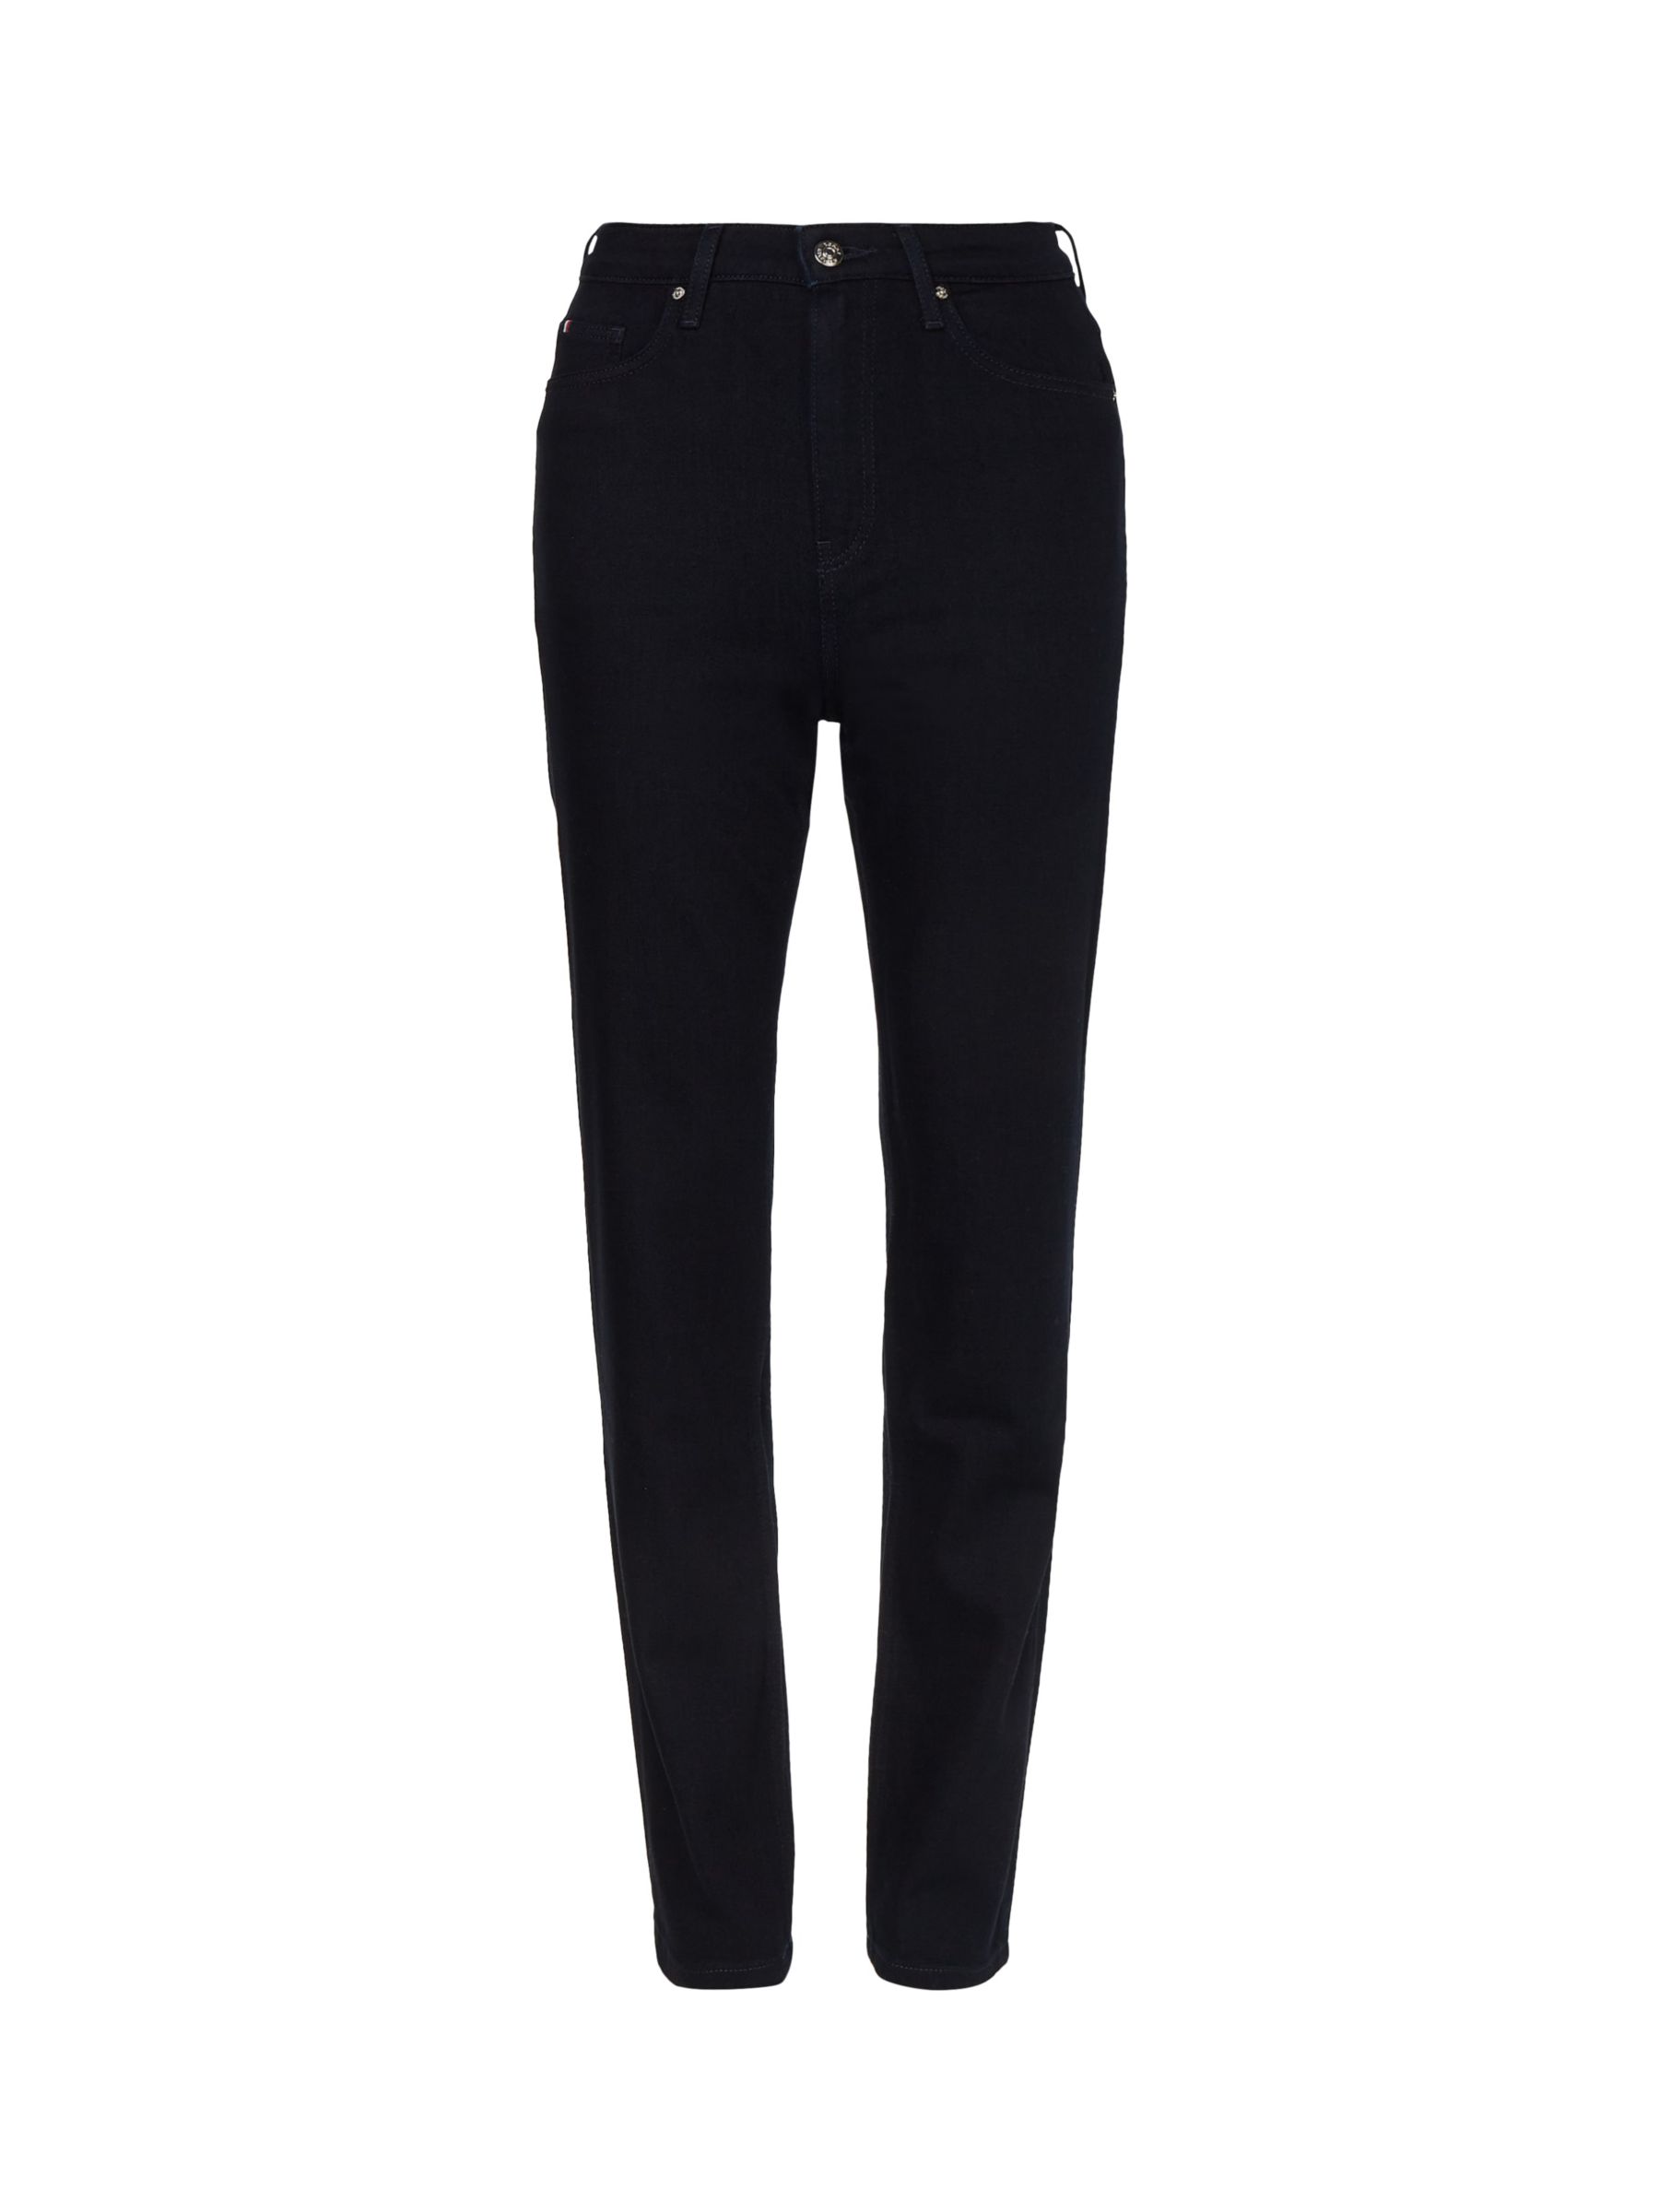 Tommy Hilfiger Classic Straight Leg Jeans, Tao at John Lewis & Partners